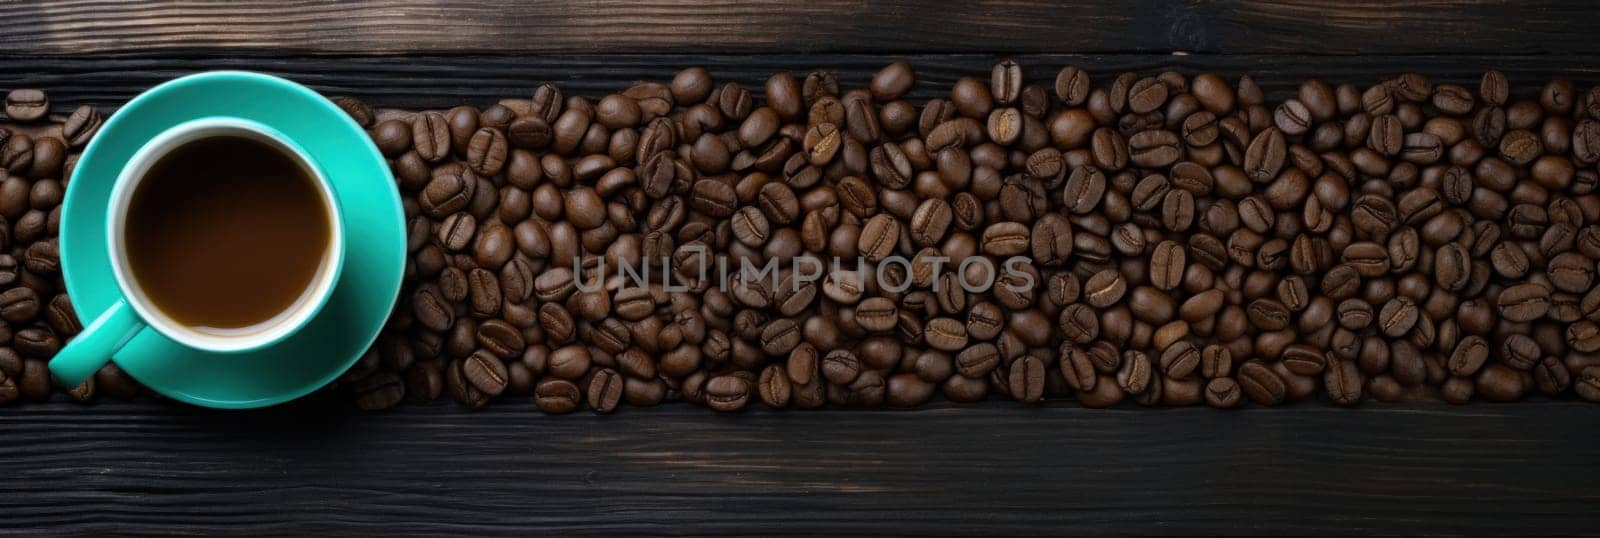 A cup of coffee is sitting on a table next to some beans, AI by starush